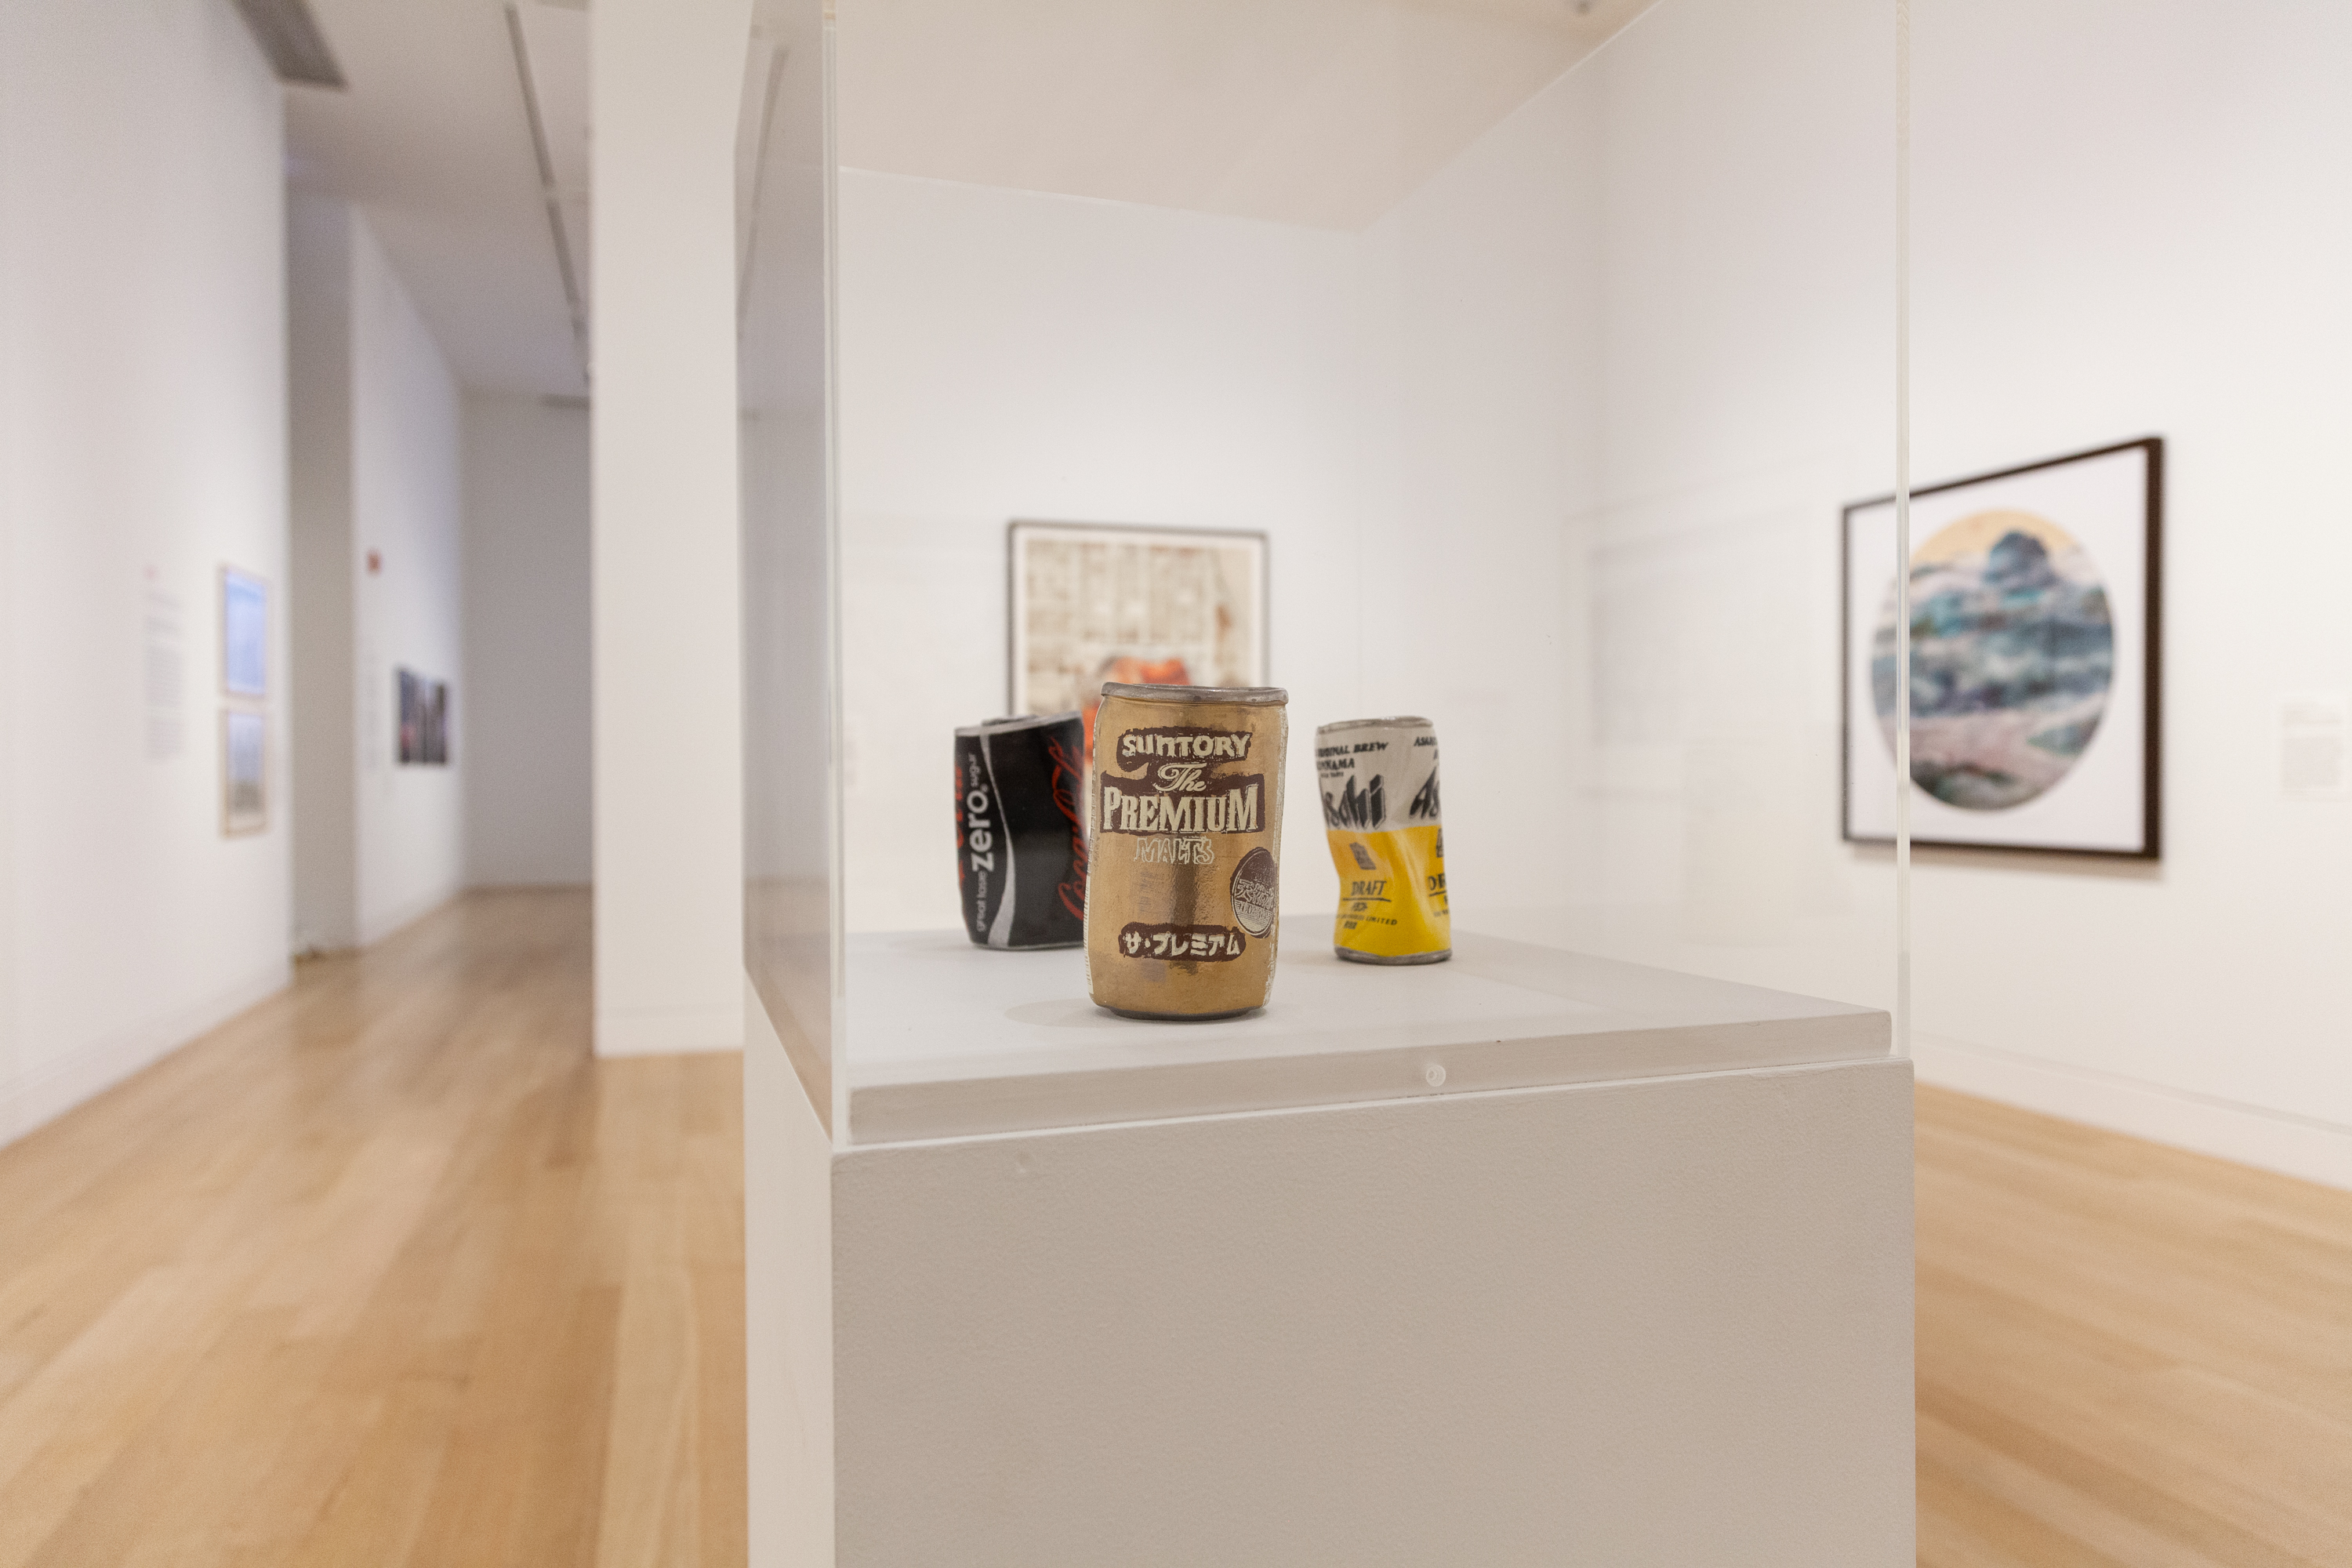 Installation view of The World to Come: Art in the Age of the Anthropocene